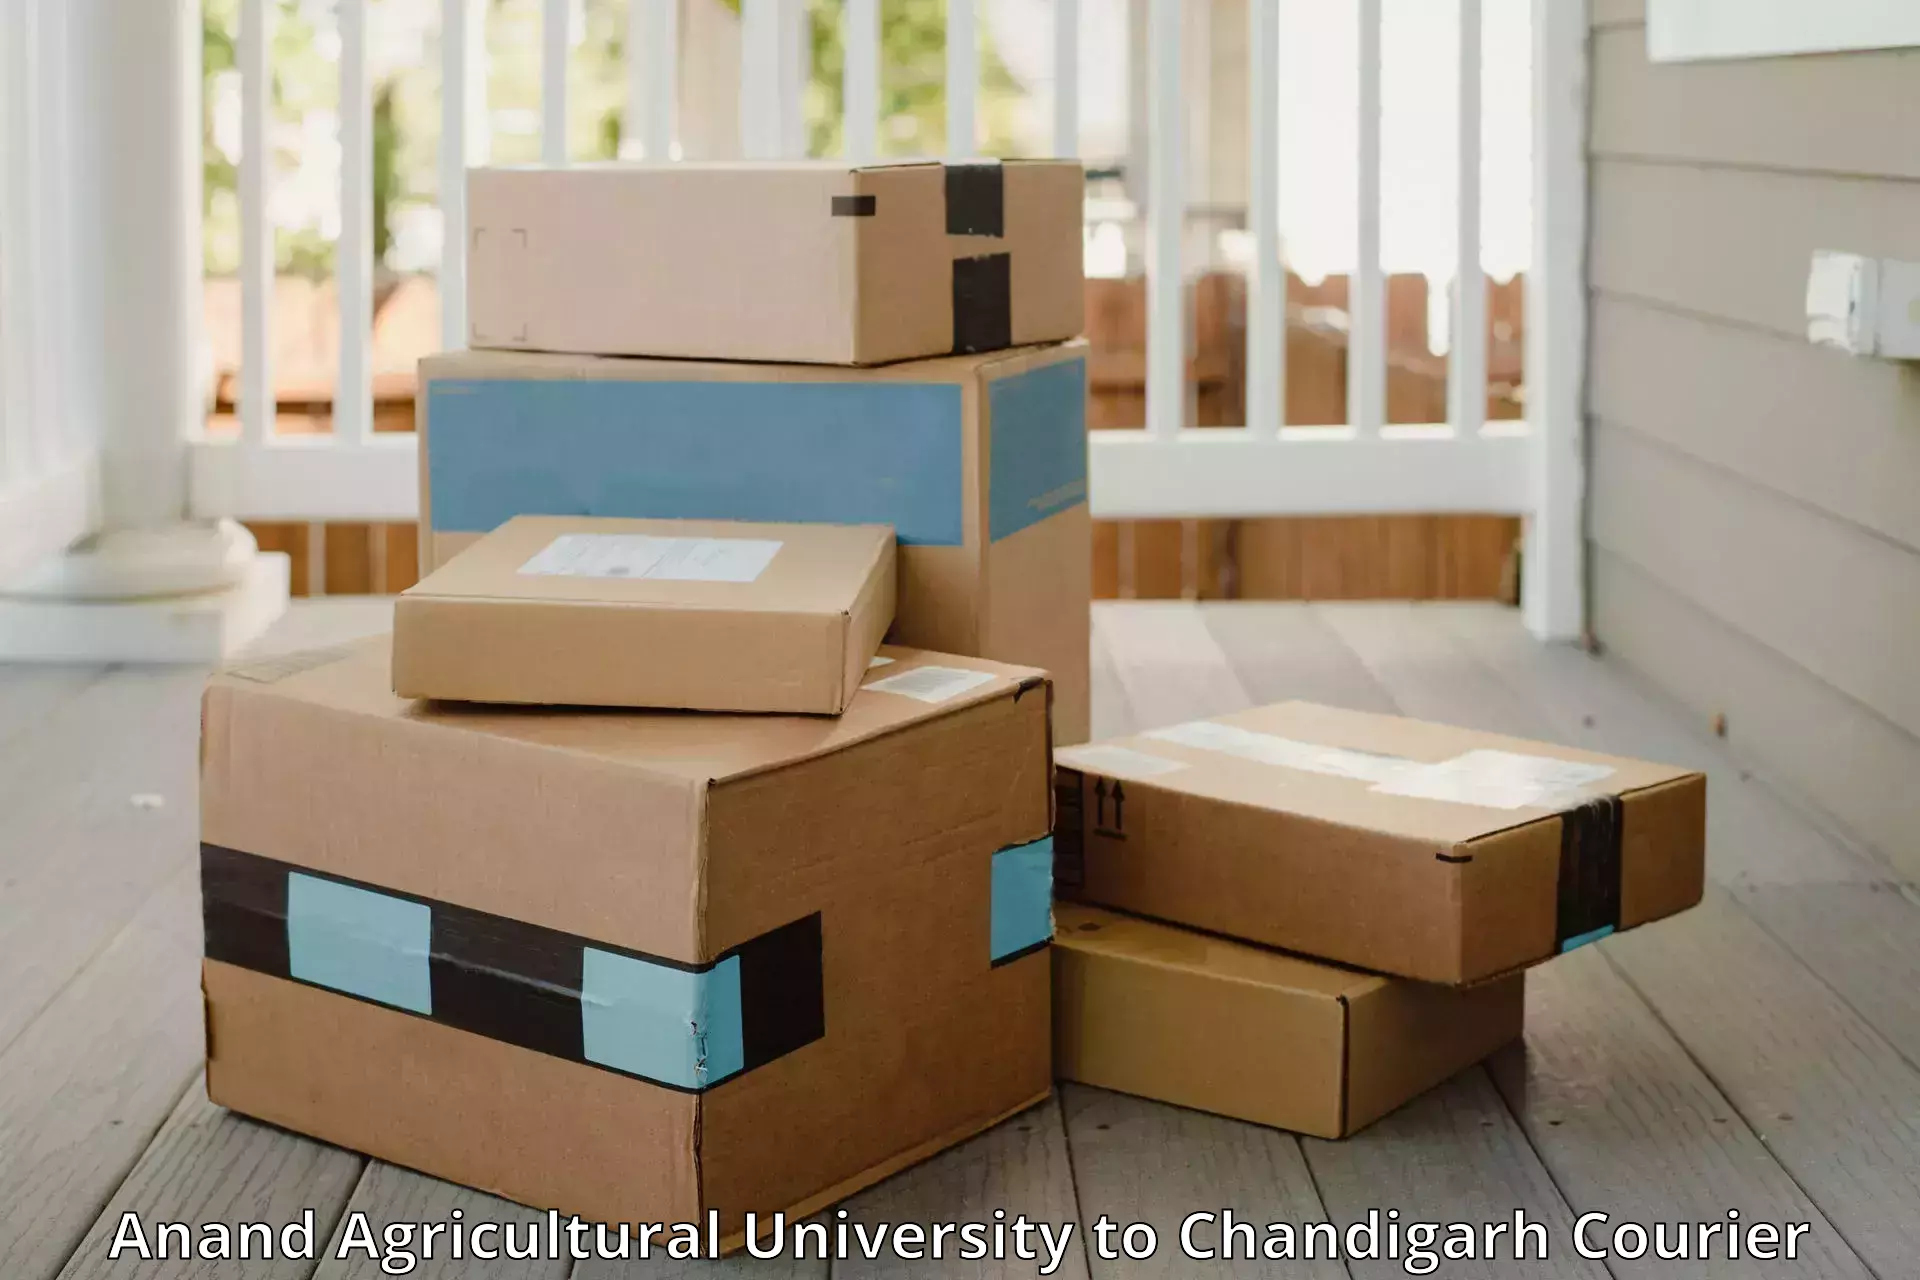 Luggage delivery system Anand Agricultural University to Chandigarh